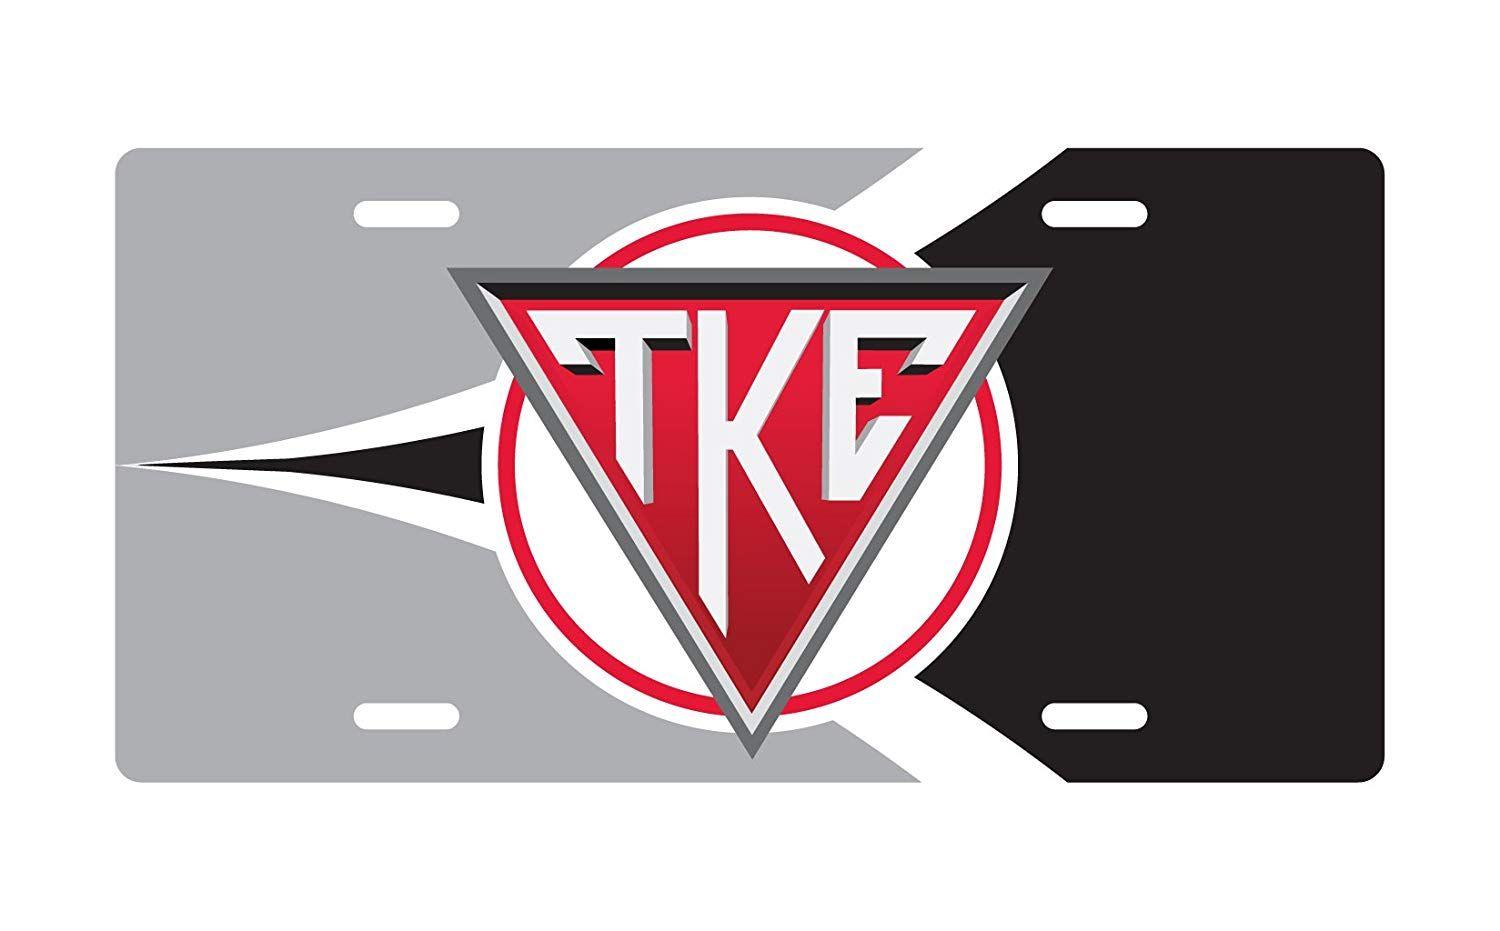 TKE Logo - Amazon.com : VictoryStore License Plate Frame, Front License Plate ...